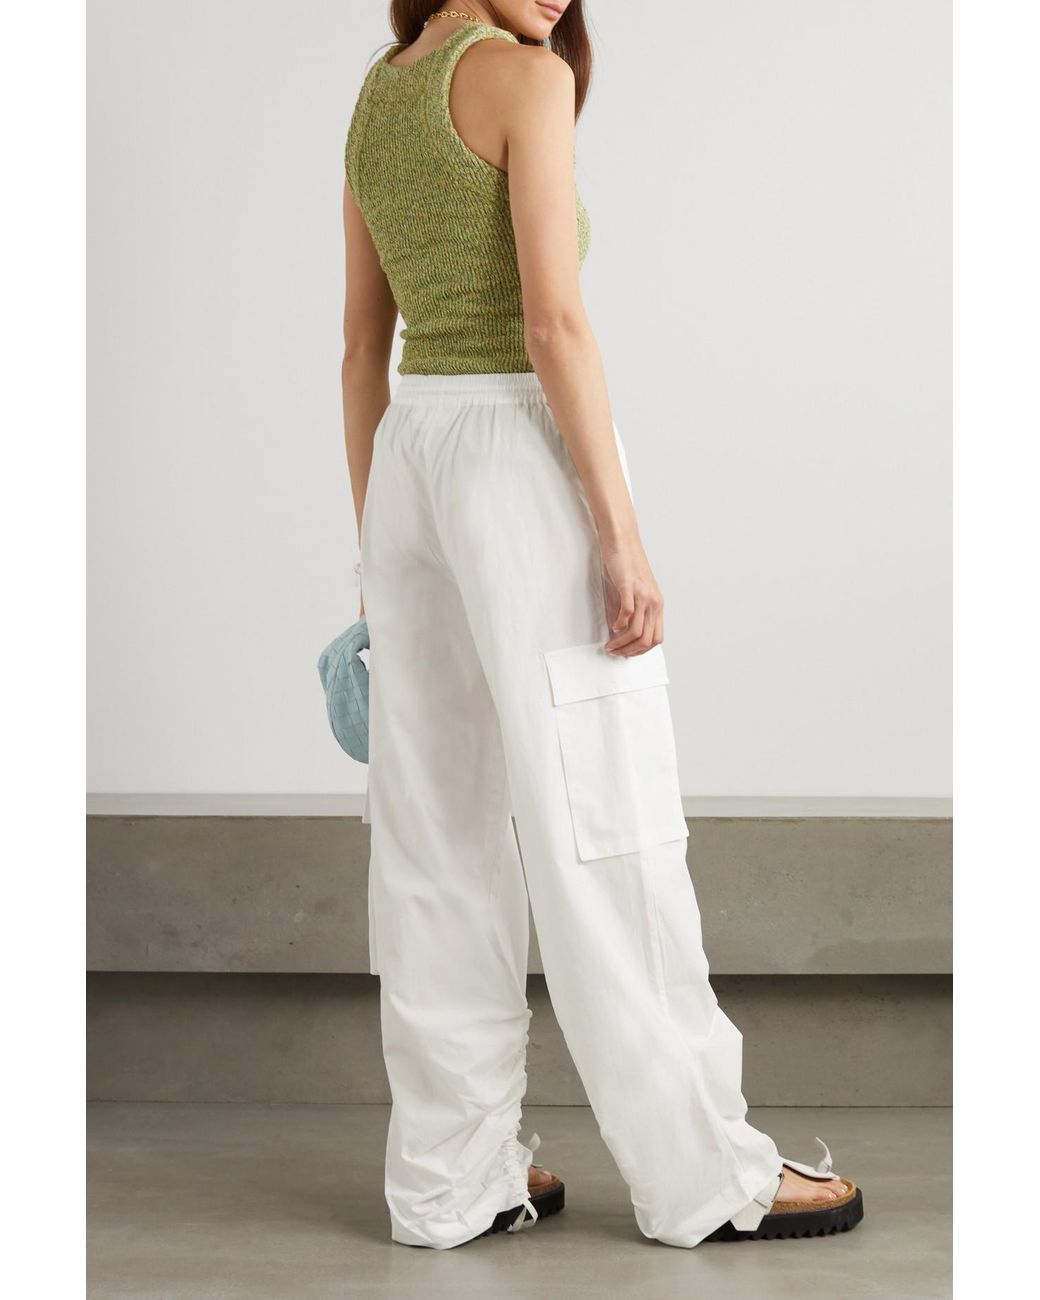 Slacks and Chinos Straight-leg trousers Womens Clothing Trousers ROTATE BIRGER CHRISTENSEN Fleece Pants in White 